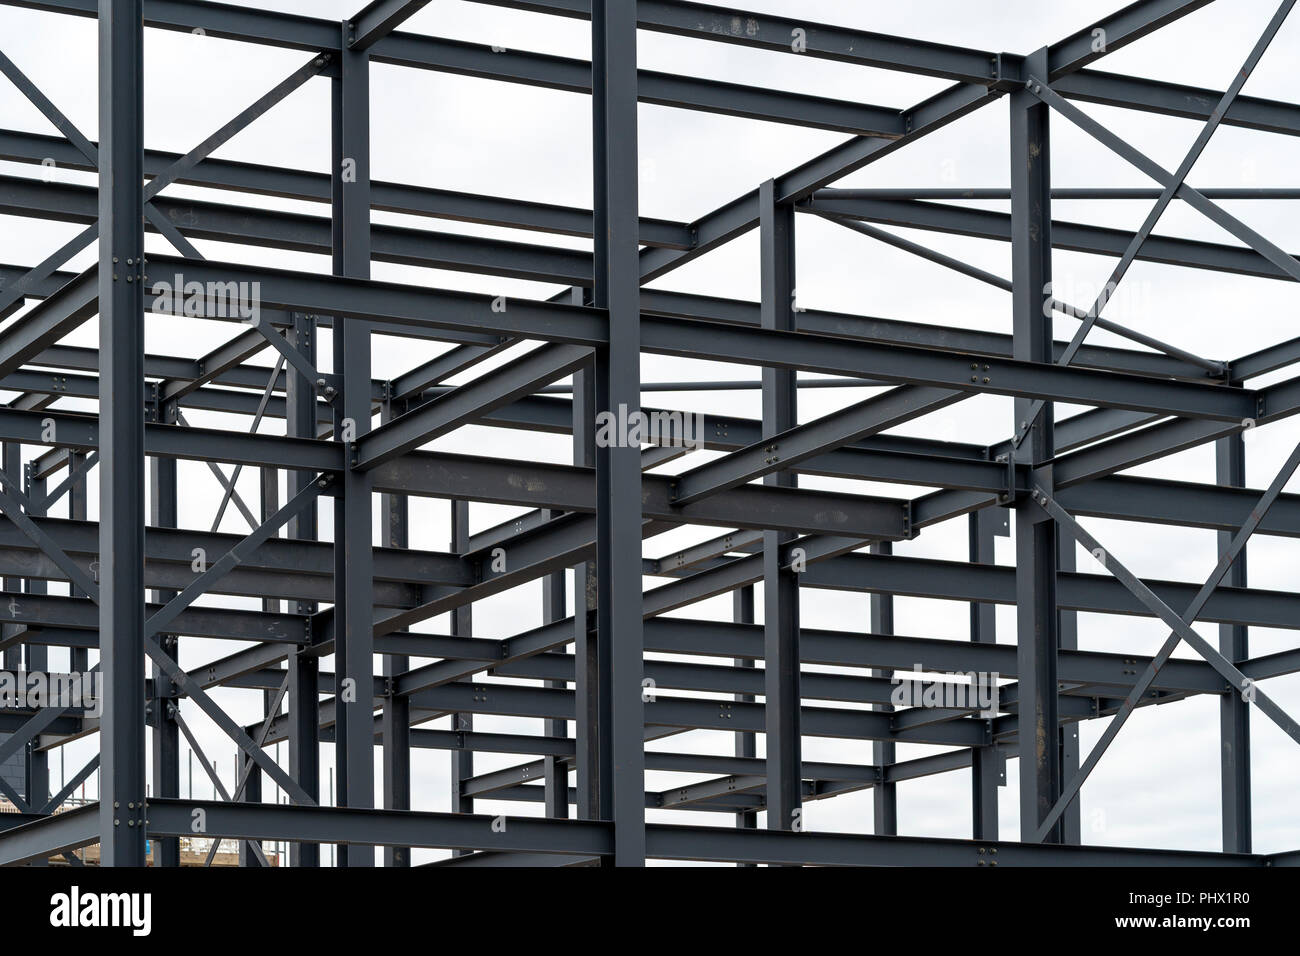 Abstract picture of steelwork against white sky Stock Photo